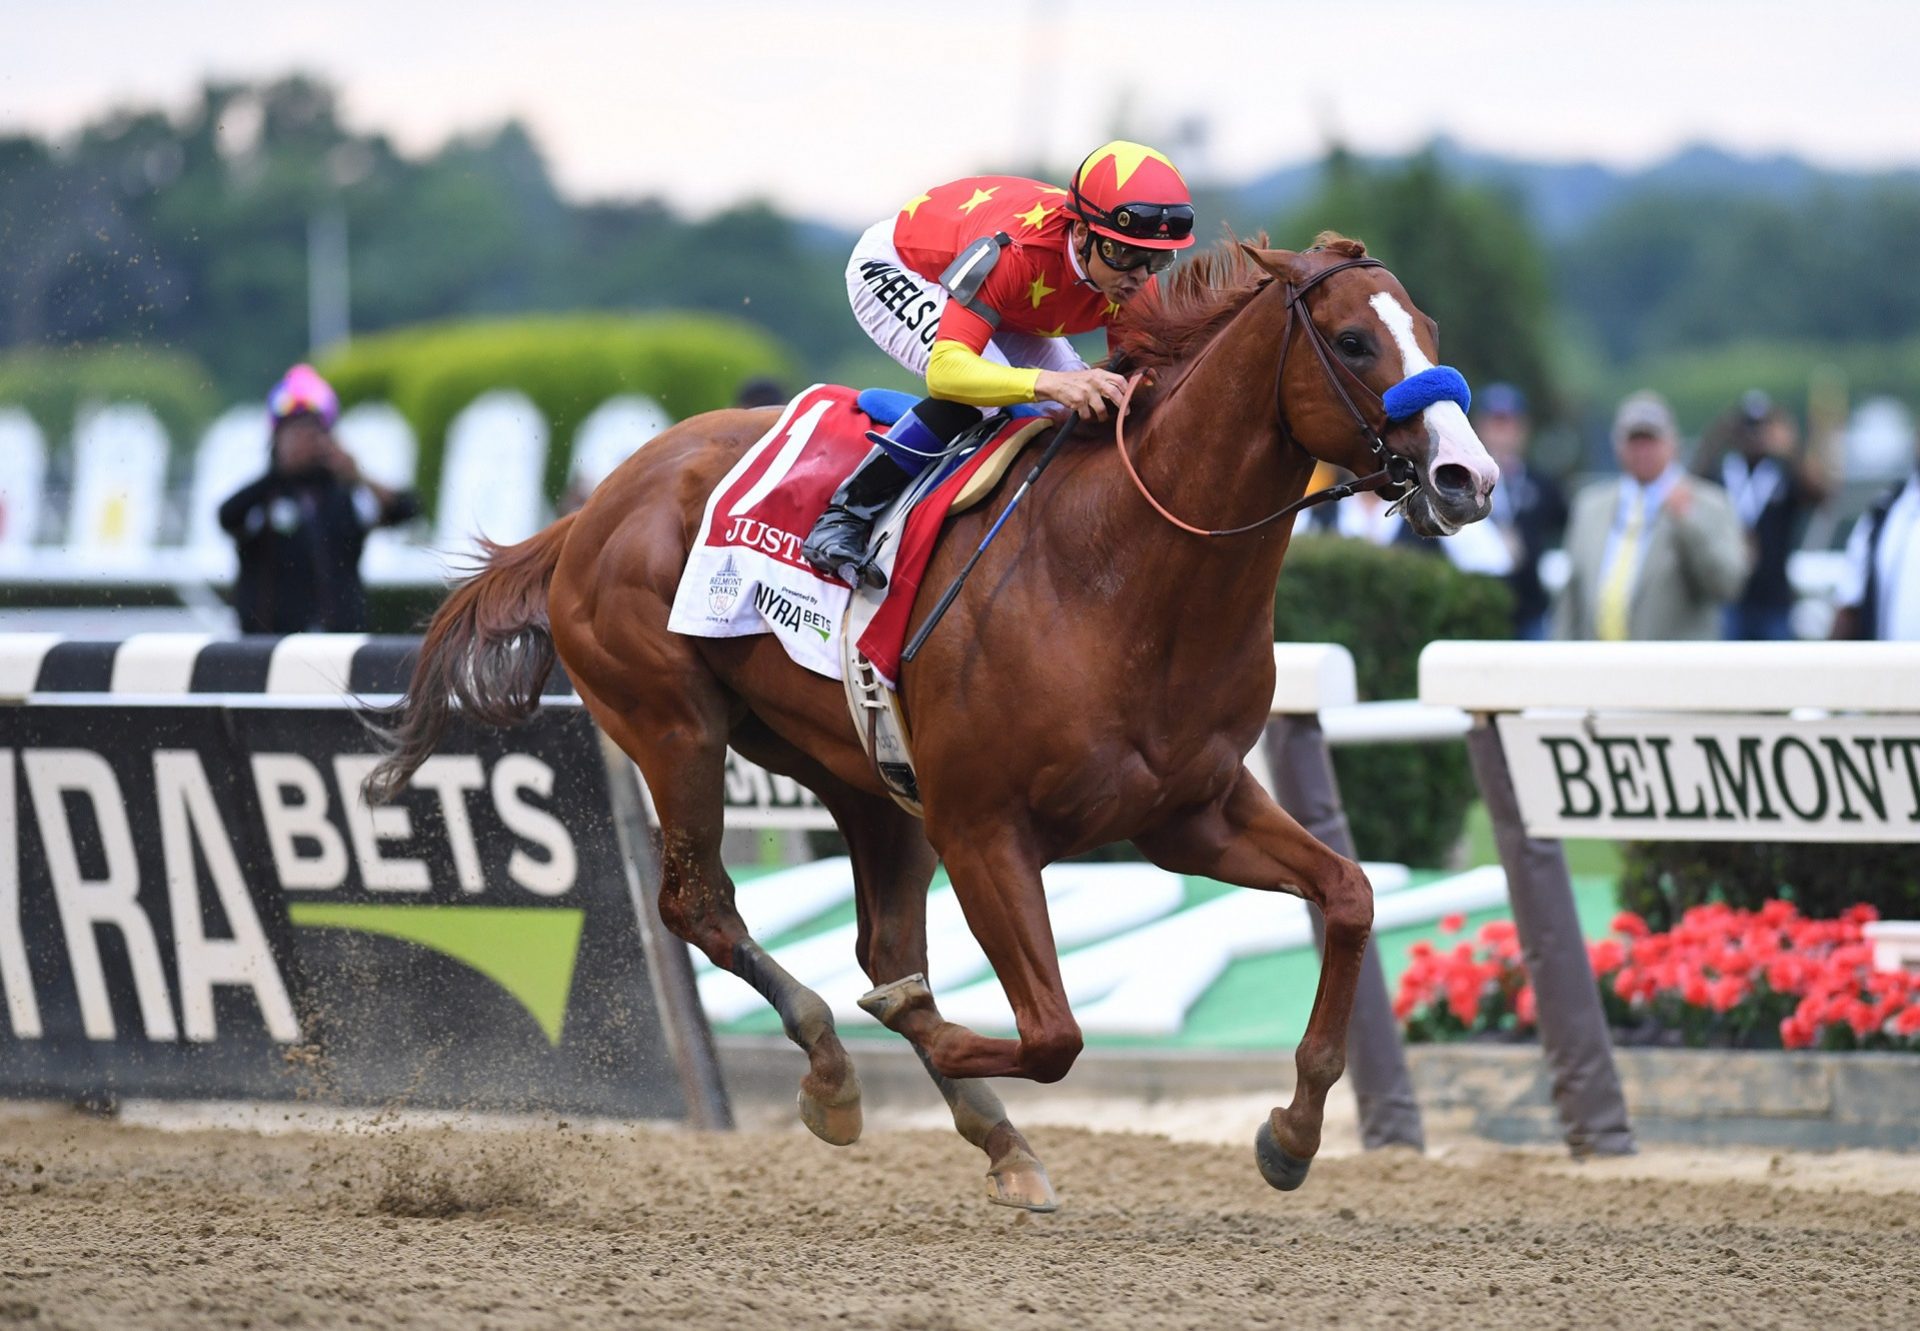 Justify winning the G1 Belmont Stakes at Belmont Park